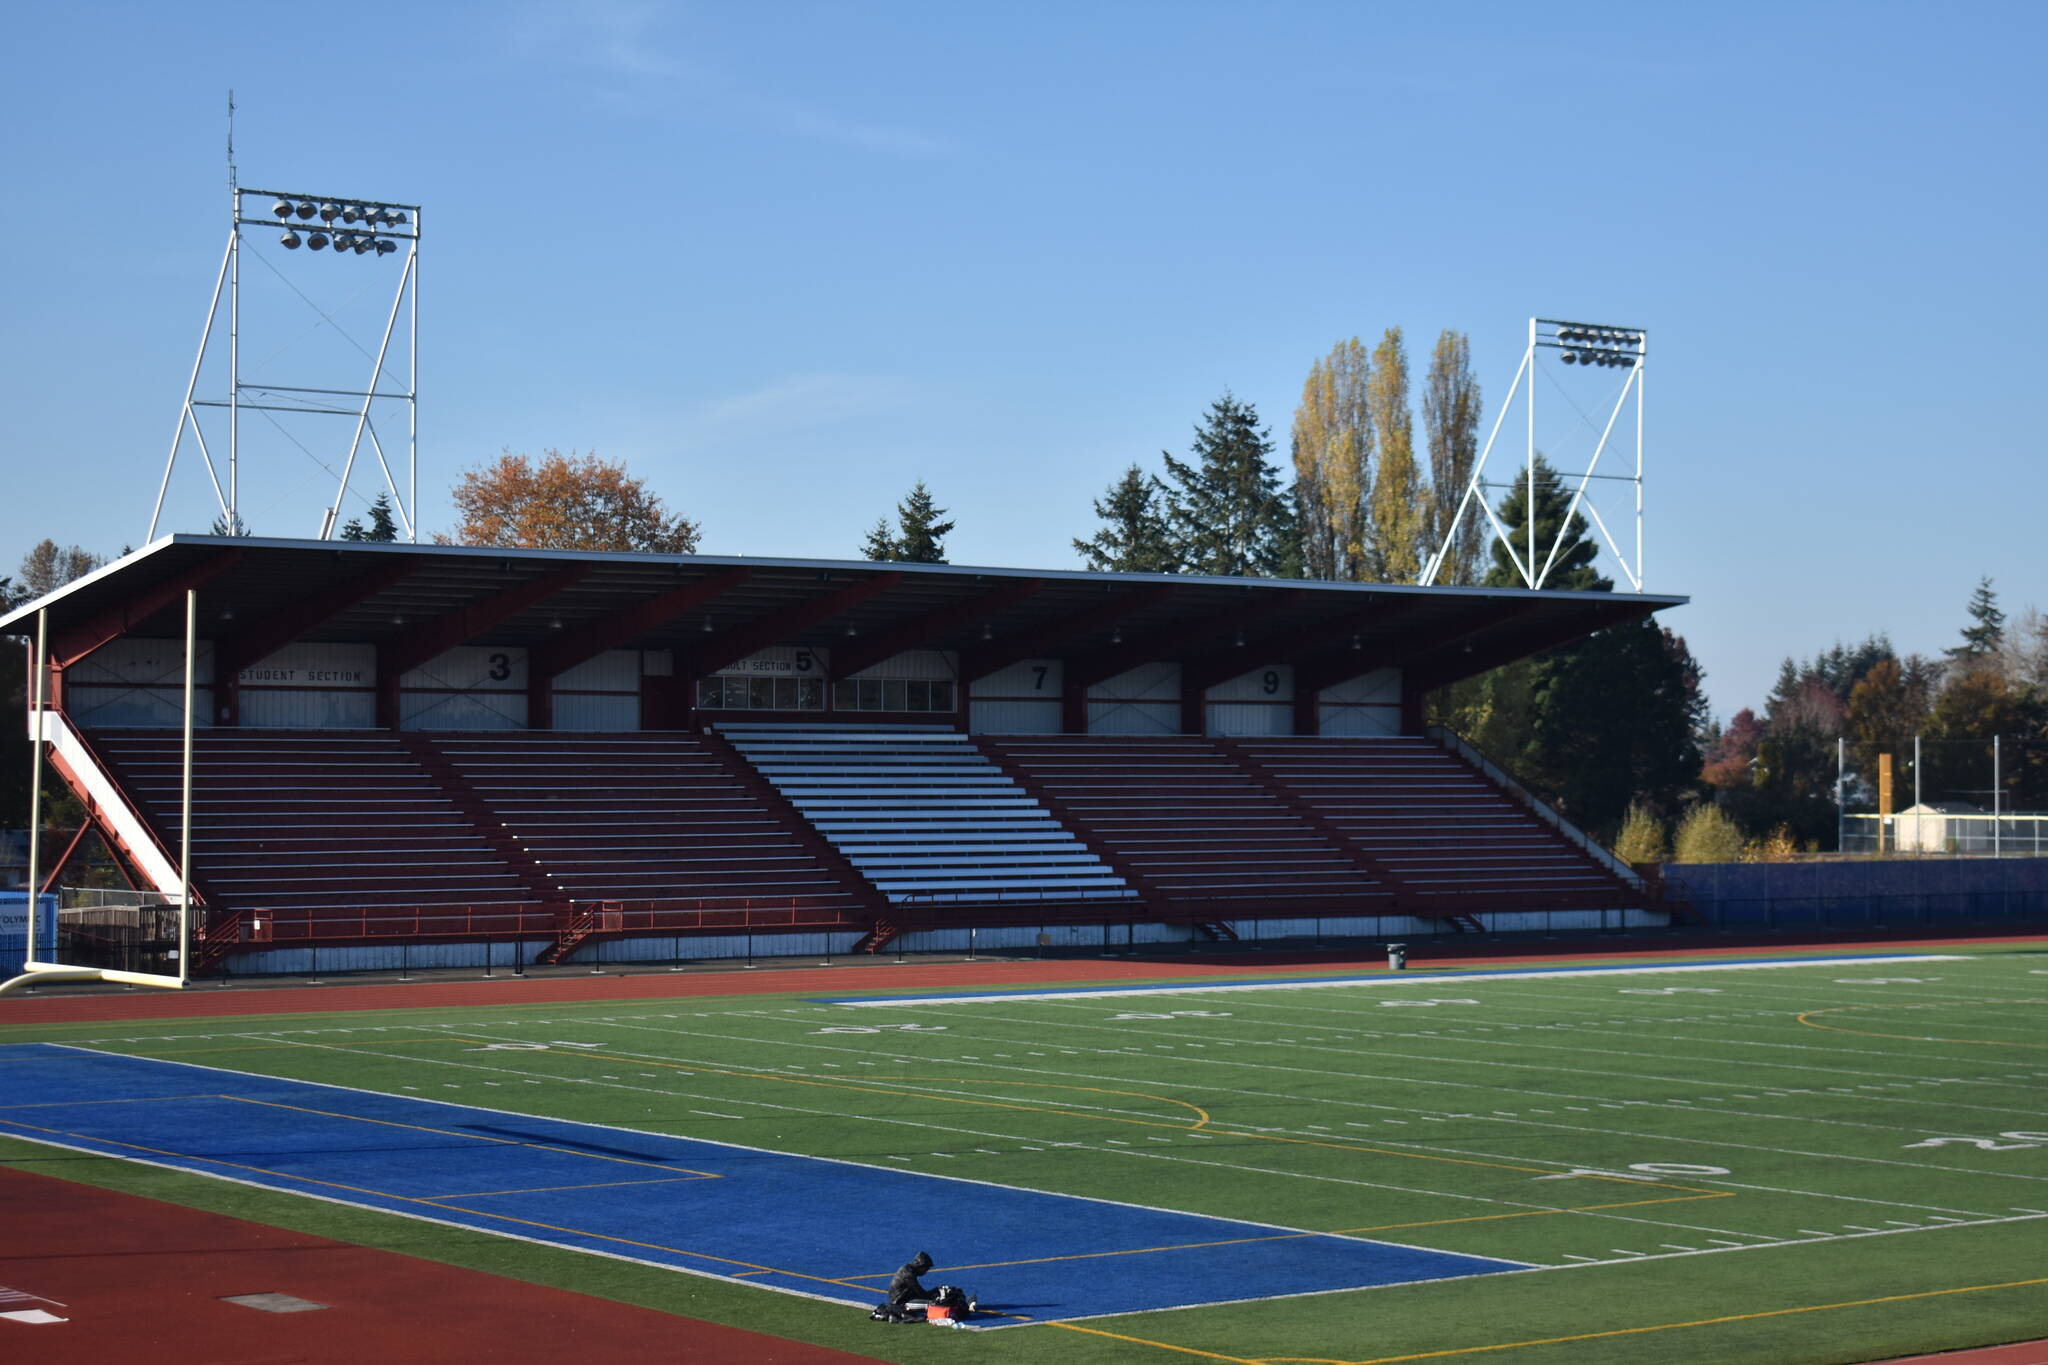 Ben Ray/the Mirror
Federal Way Memorial Stadium has been an icon in the prep sports world for 51 years, and will be getting some much-needed upgrades.